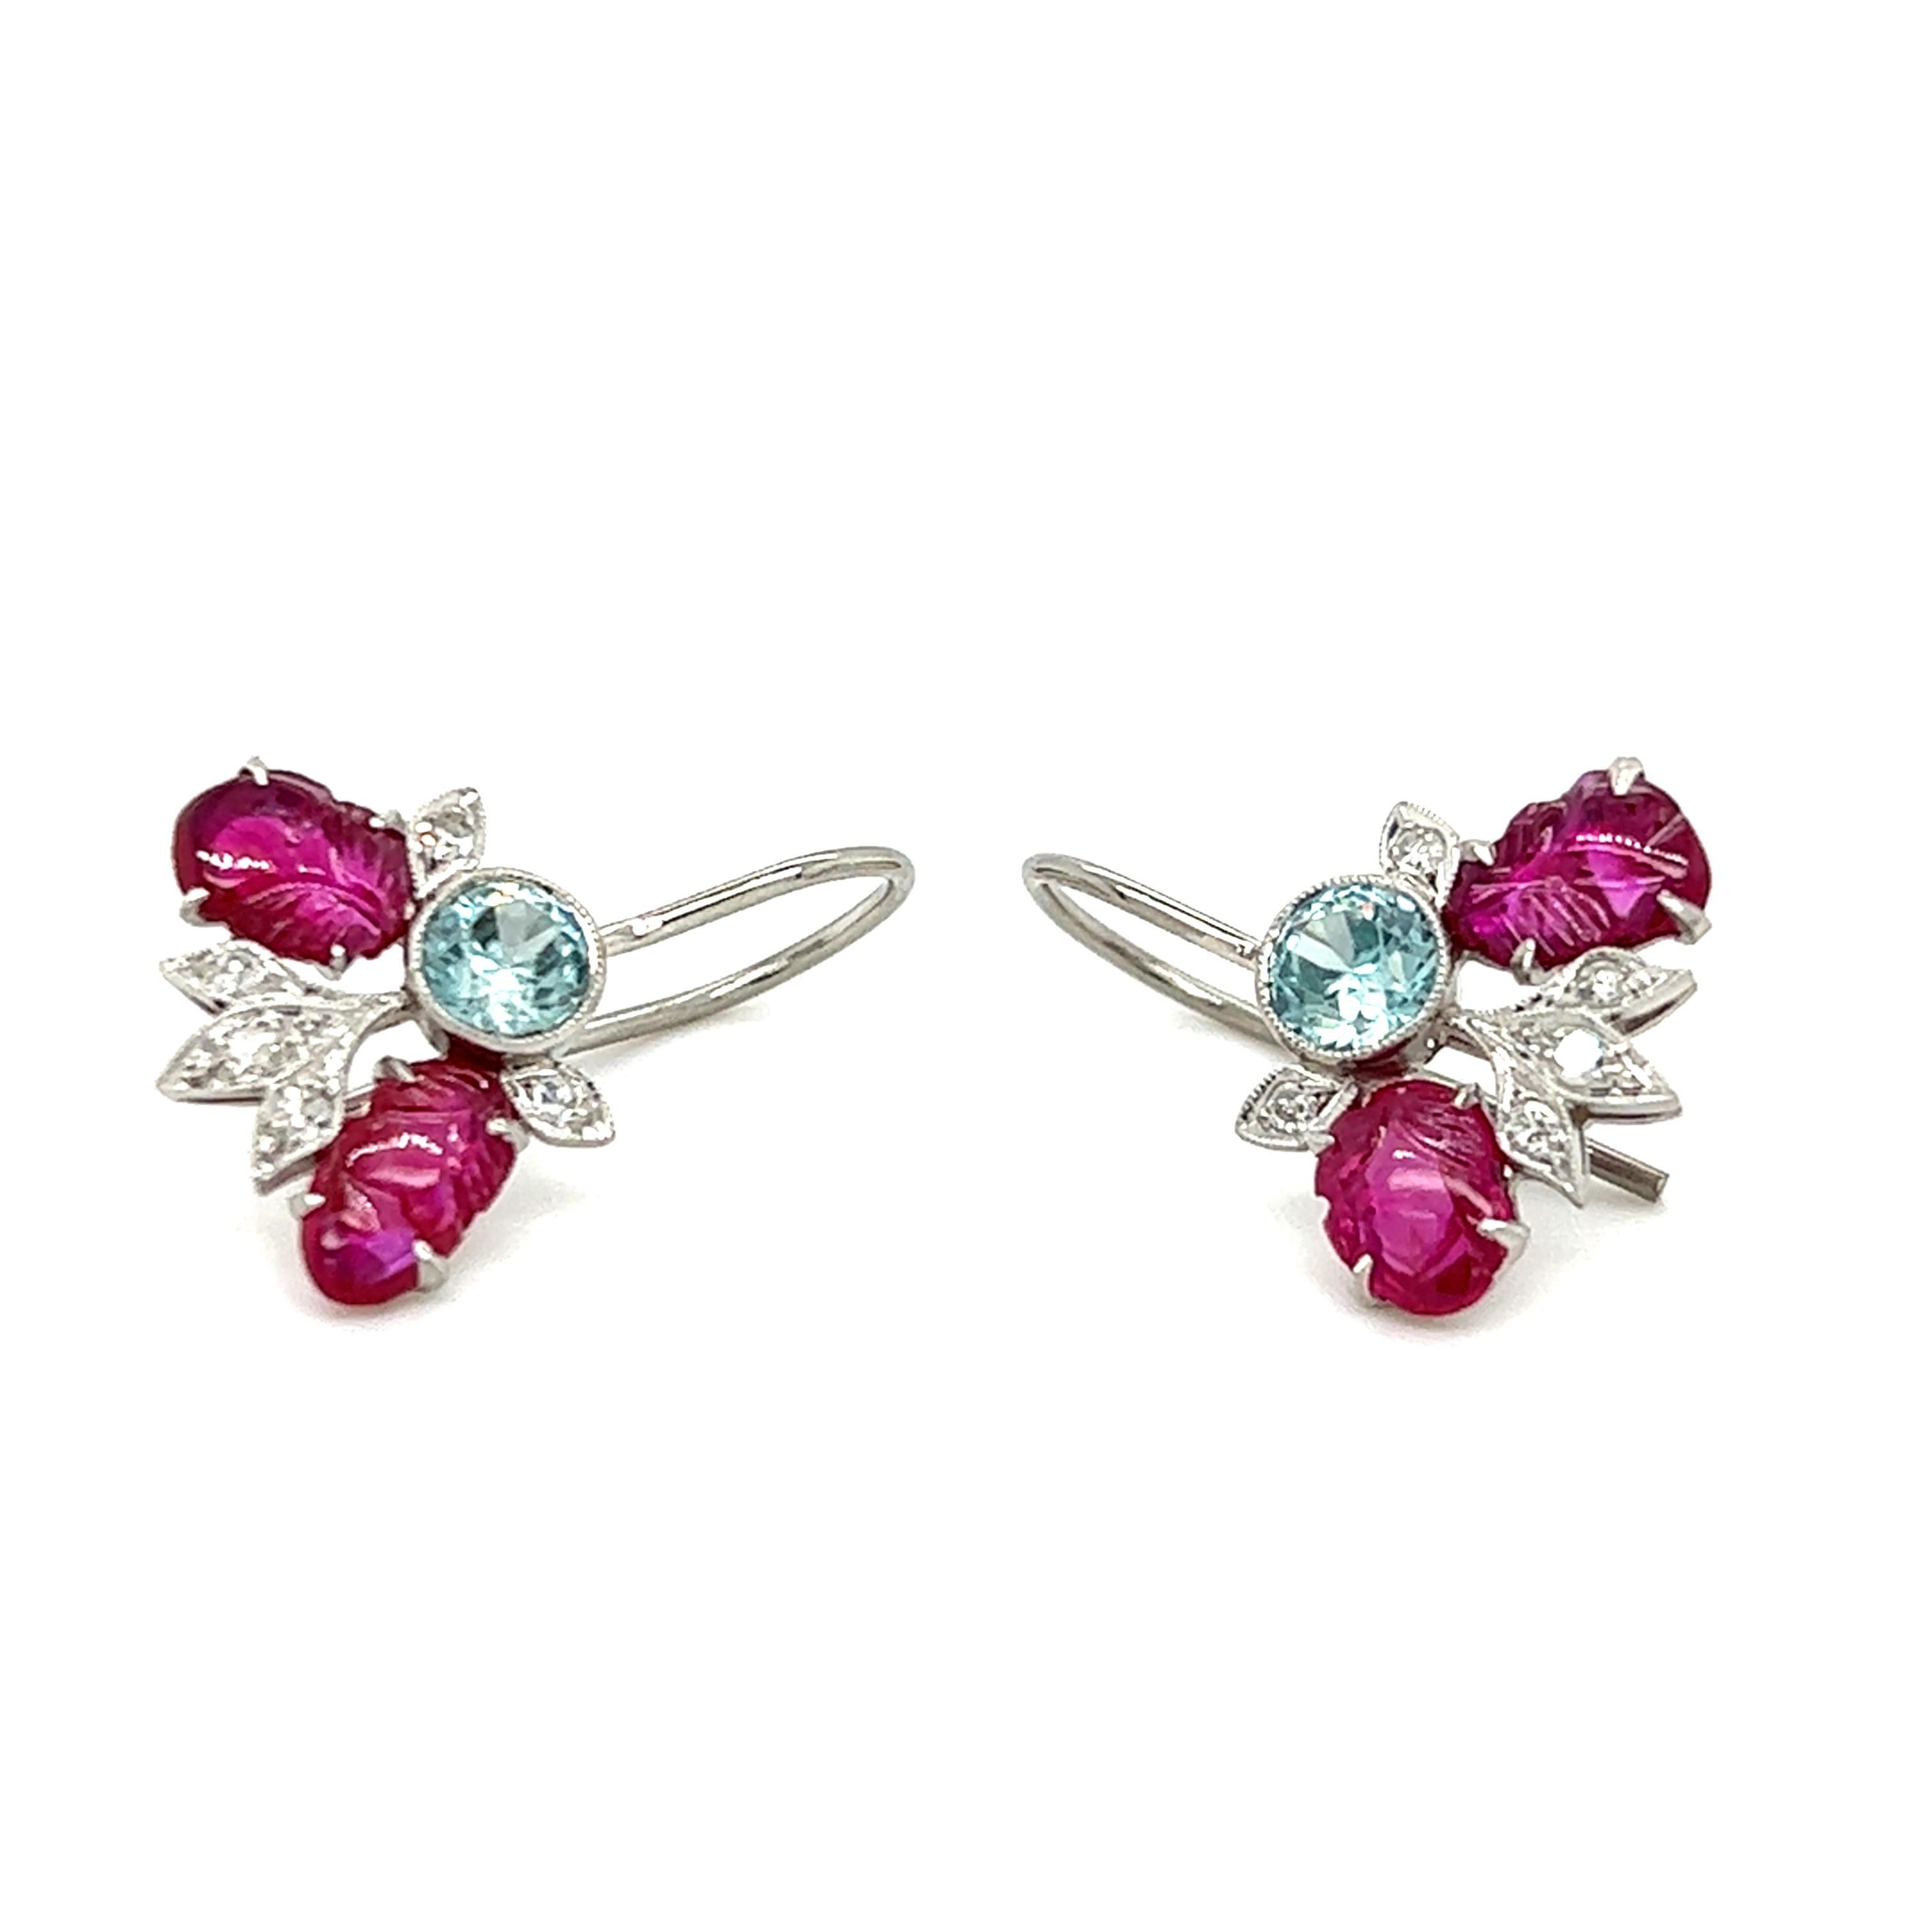 One pair of Art Deco platinum earrings, each set with two 6x4mm oval carved rubies, one 4mm round blue zircon and five (5) single cut diamonds, approximately 0.15 carat total weight with matching H/I color and SI1 clarity.  The earrings measure